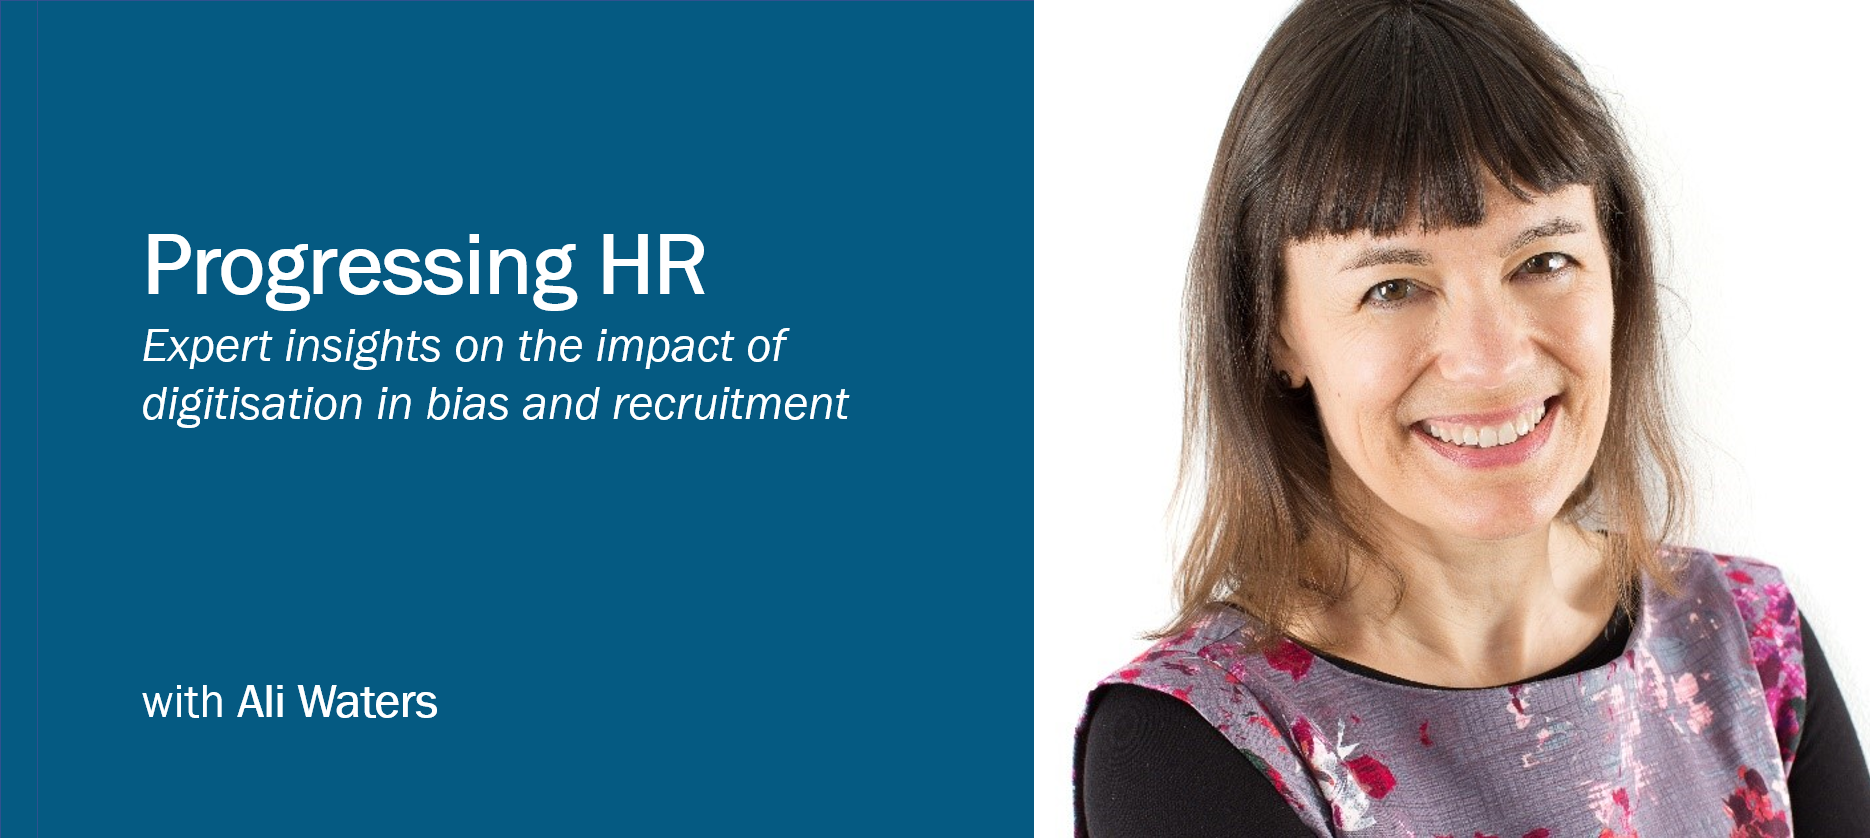 Progressing HR with Ali Waters